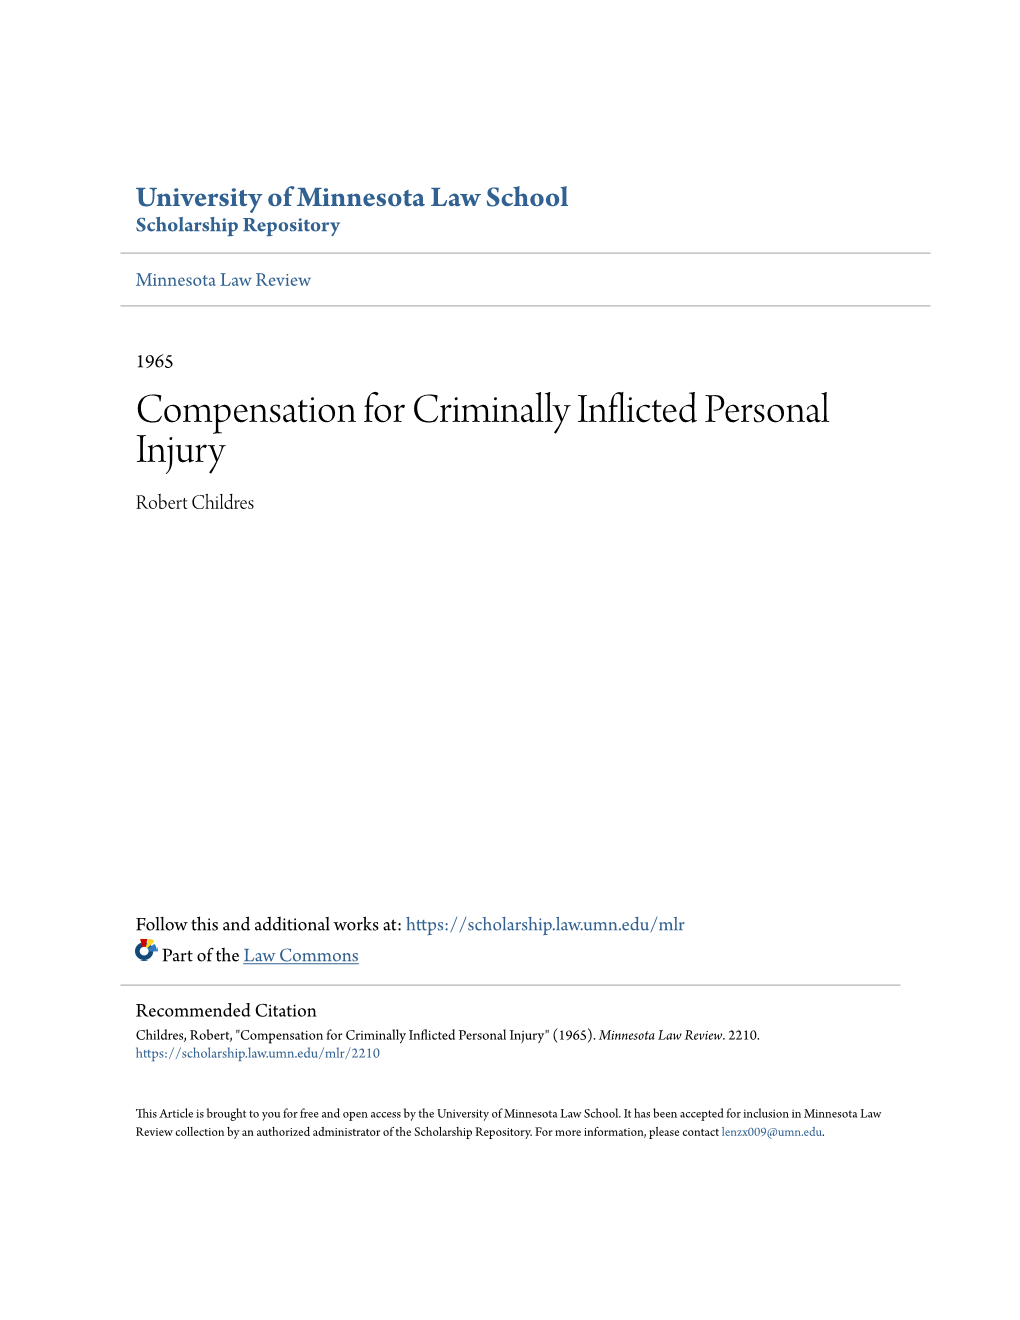 Compensation for Criminally Inflicted Personal Injury Robert Childres